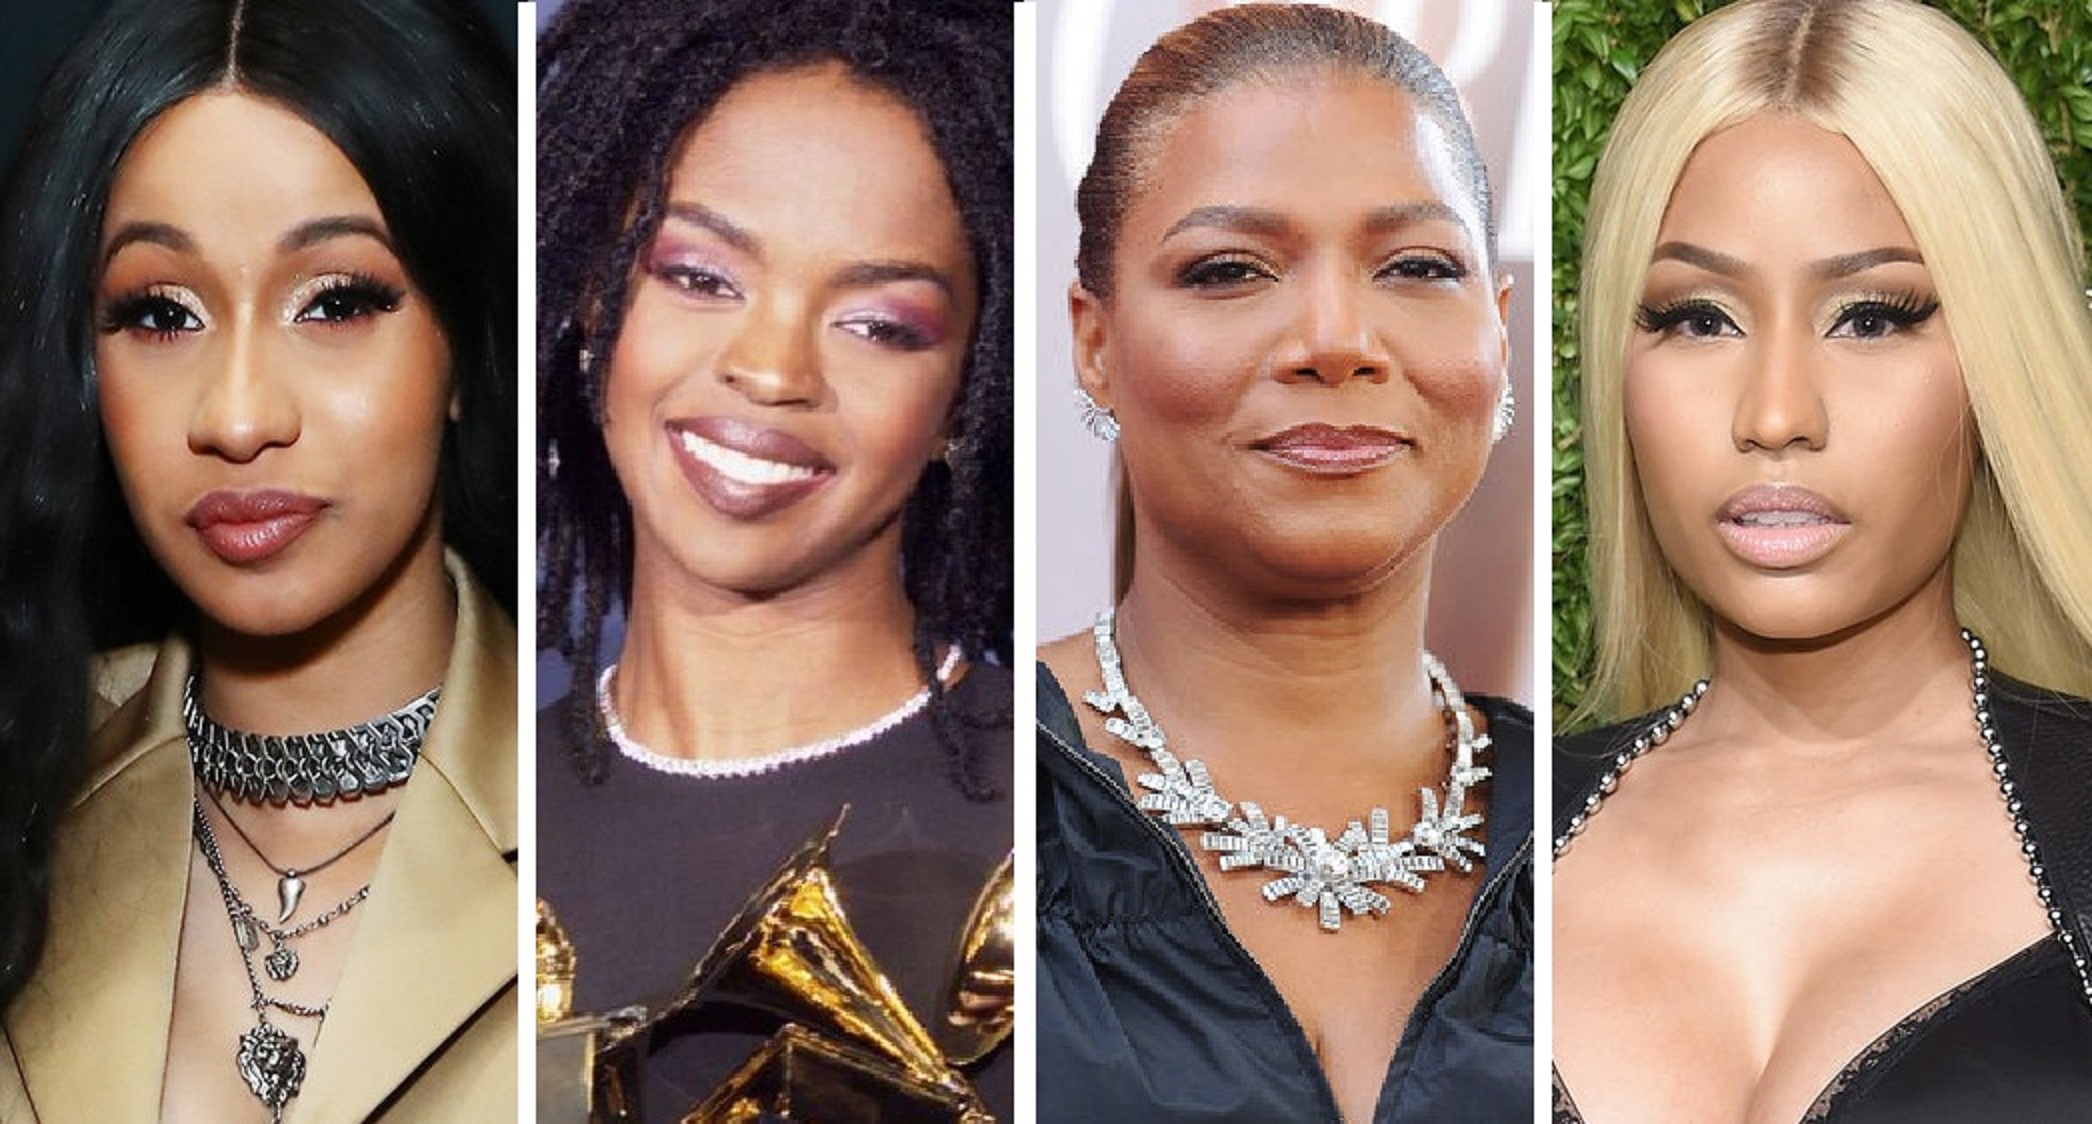 Poll: Vote For the Best Female Rapper Of All Time